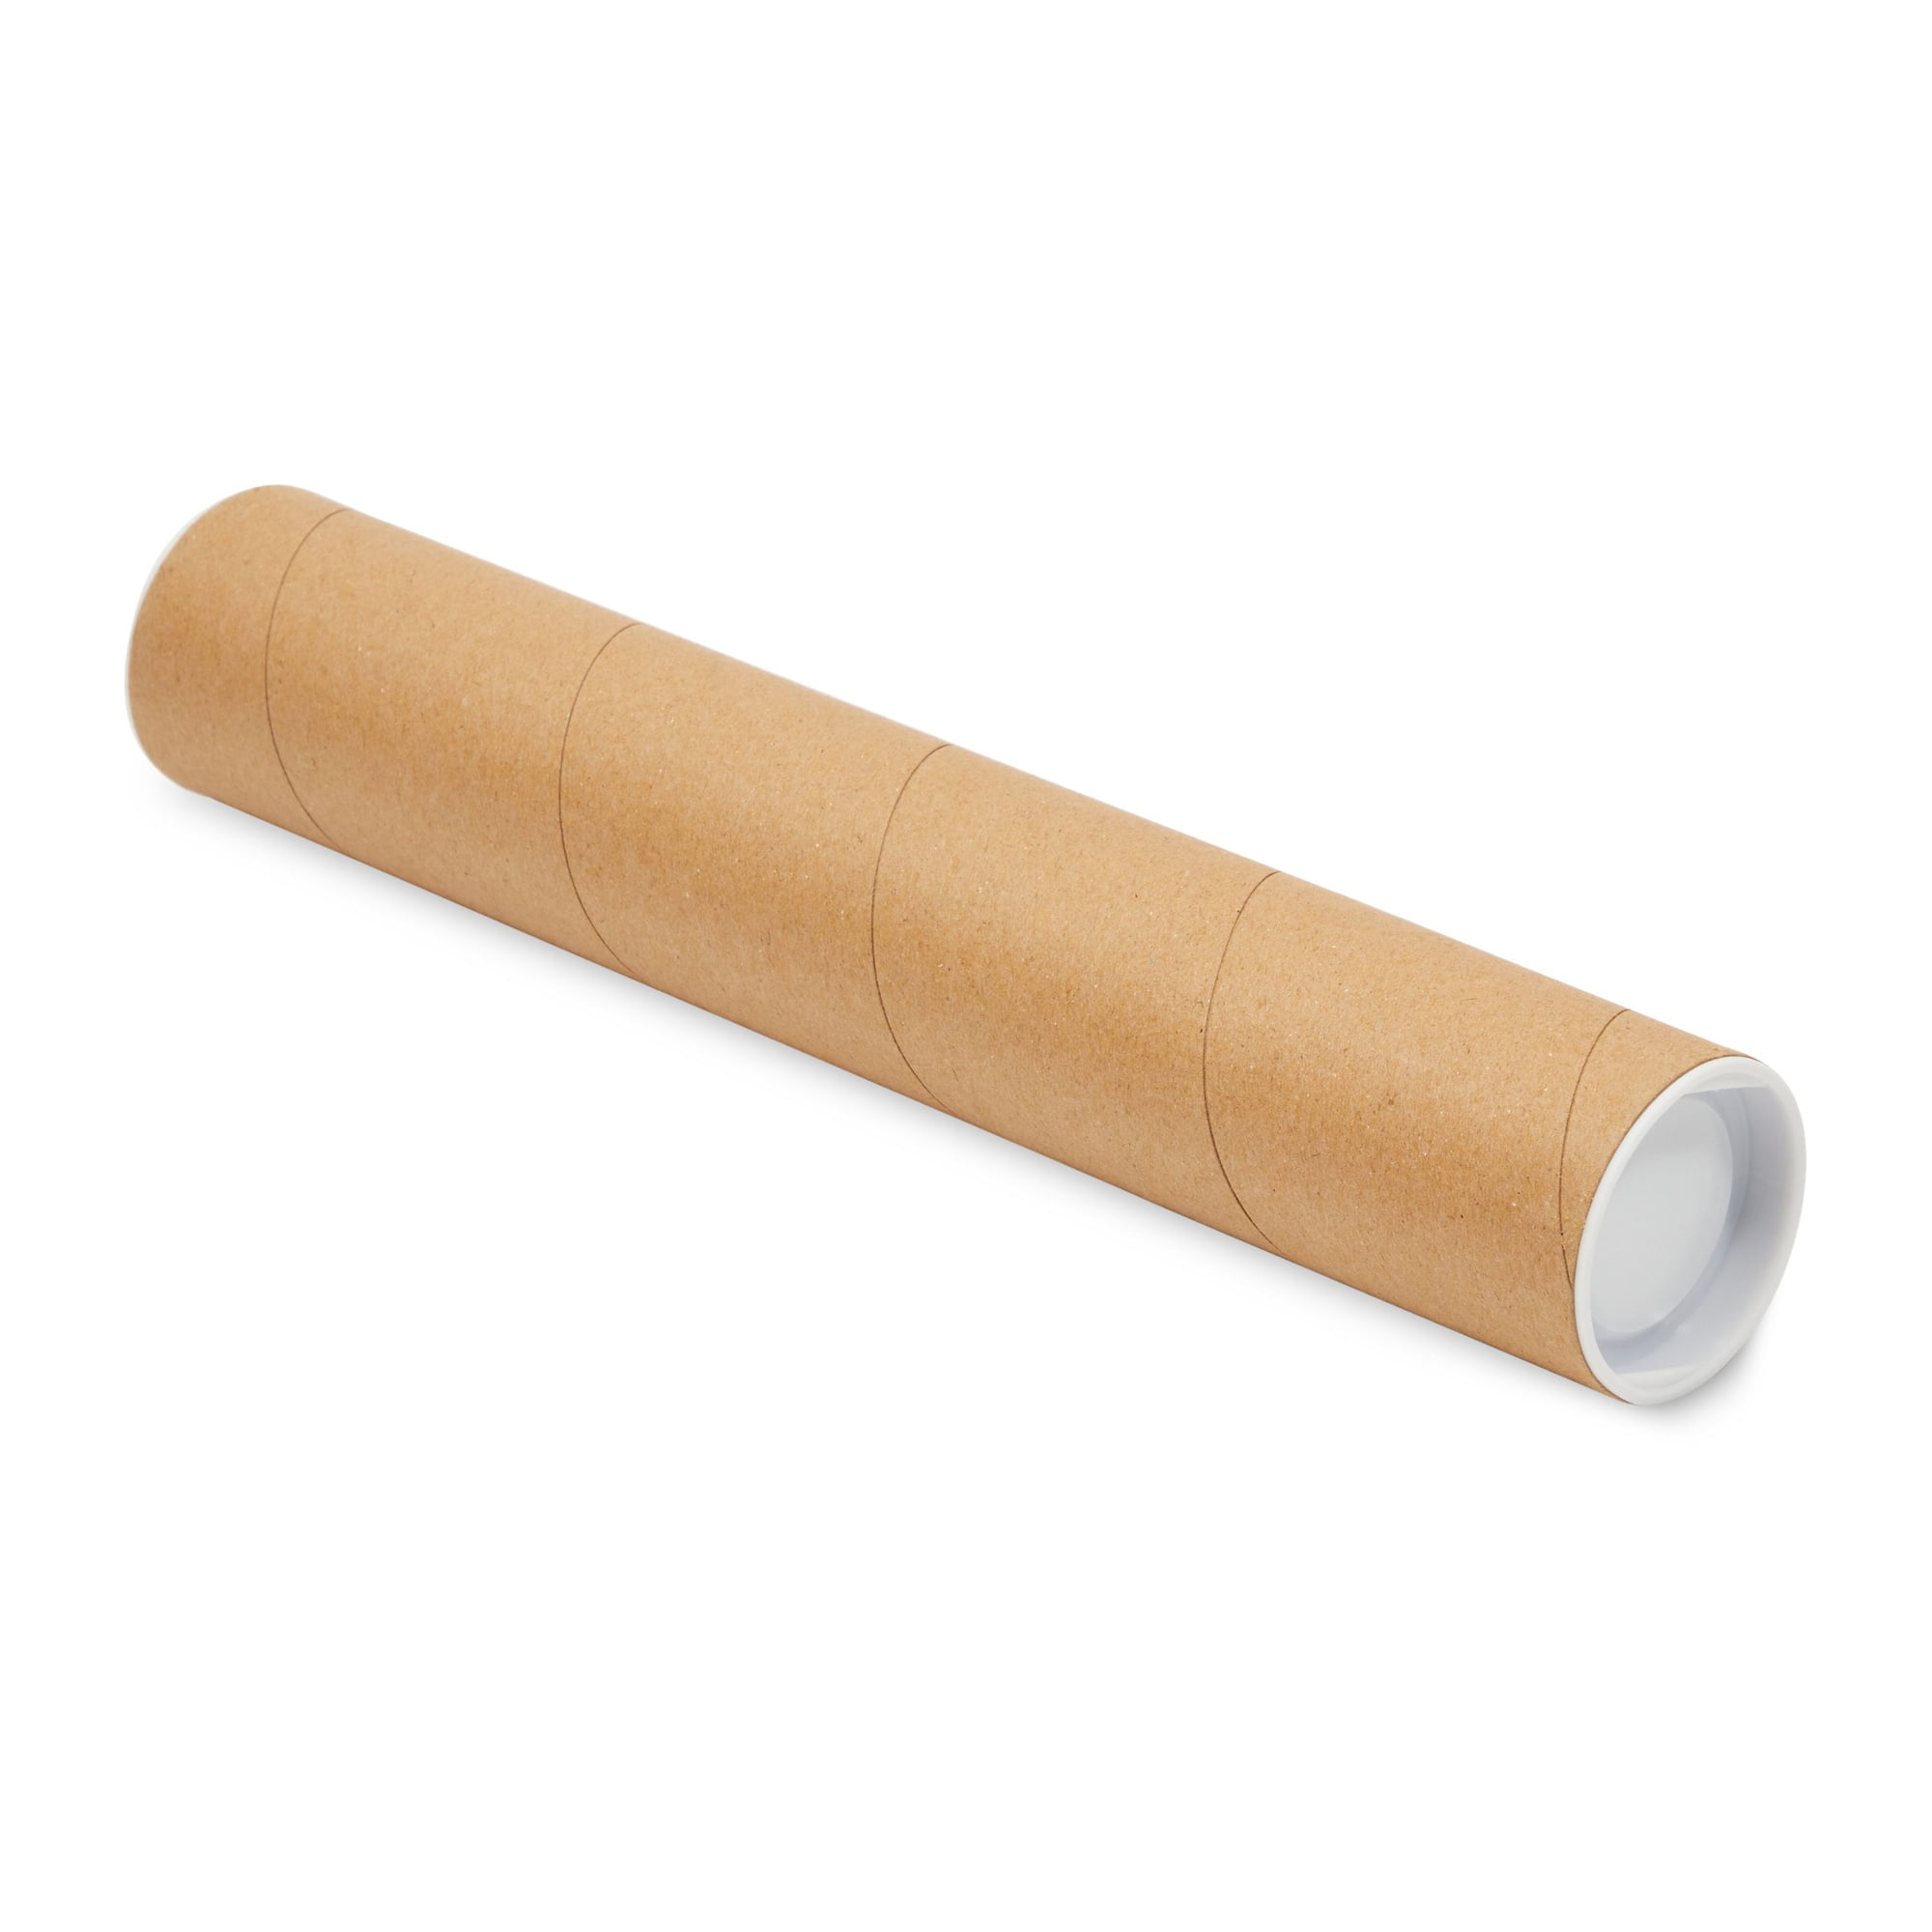 Stockroom Plus 12-Pack Mailing Tubes with Caps, 2x15-Inch Kraft Paper Poster Tube for Shipping, Packing, Bulk Round Packaging, Cardboard Mailers, Art